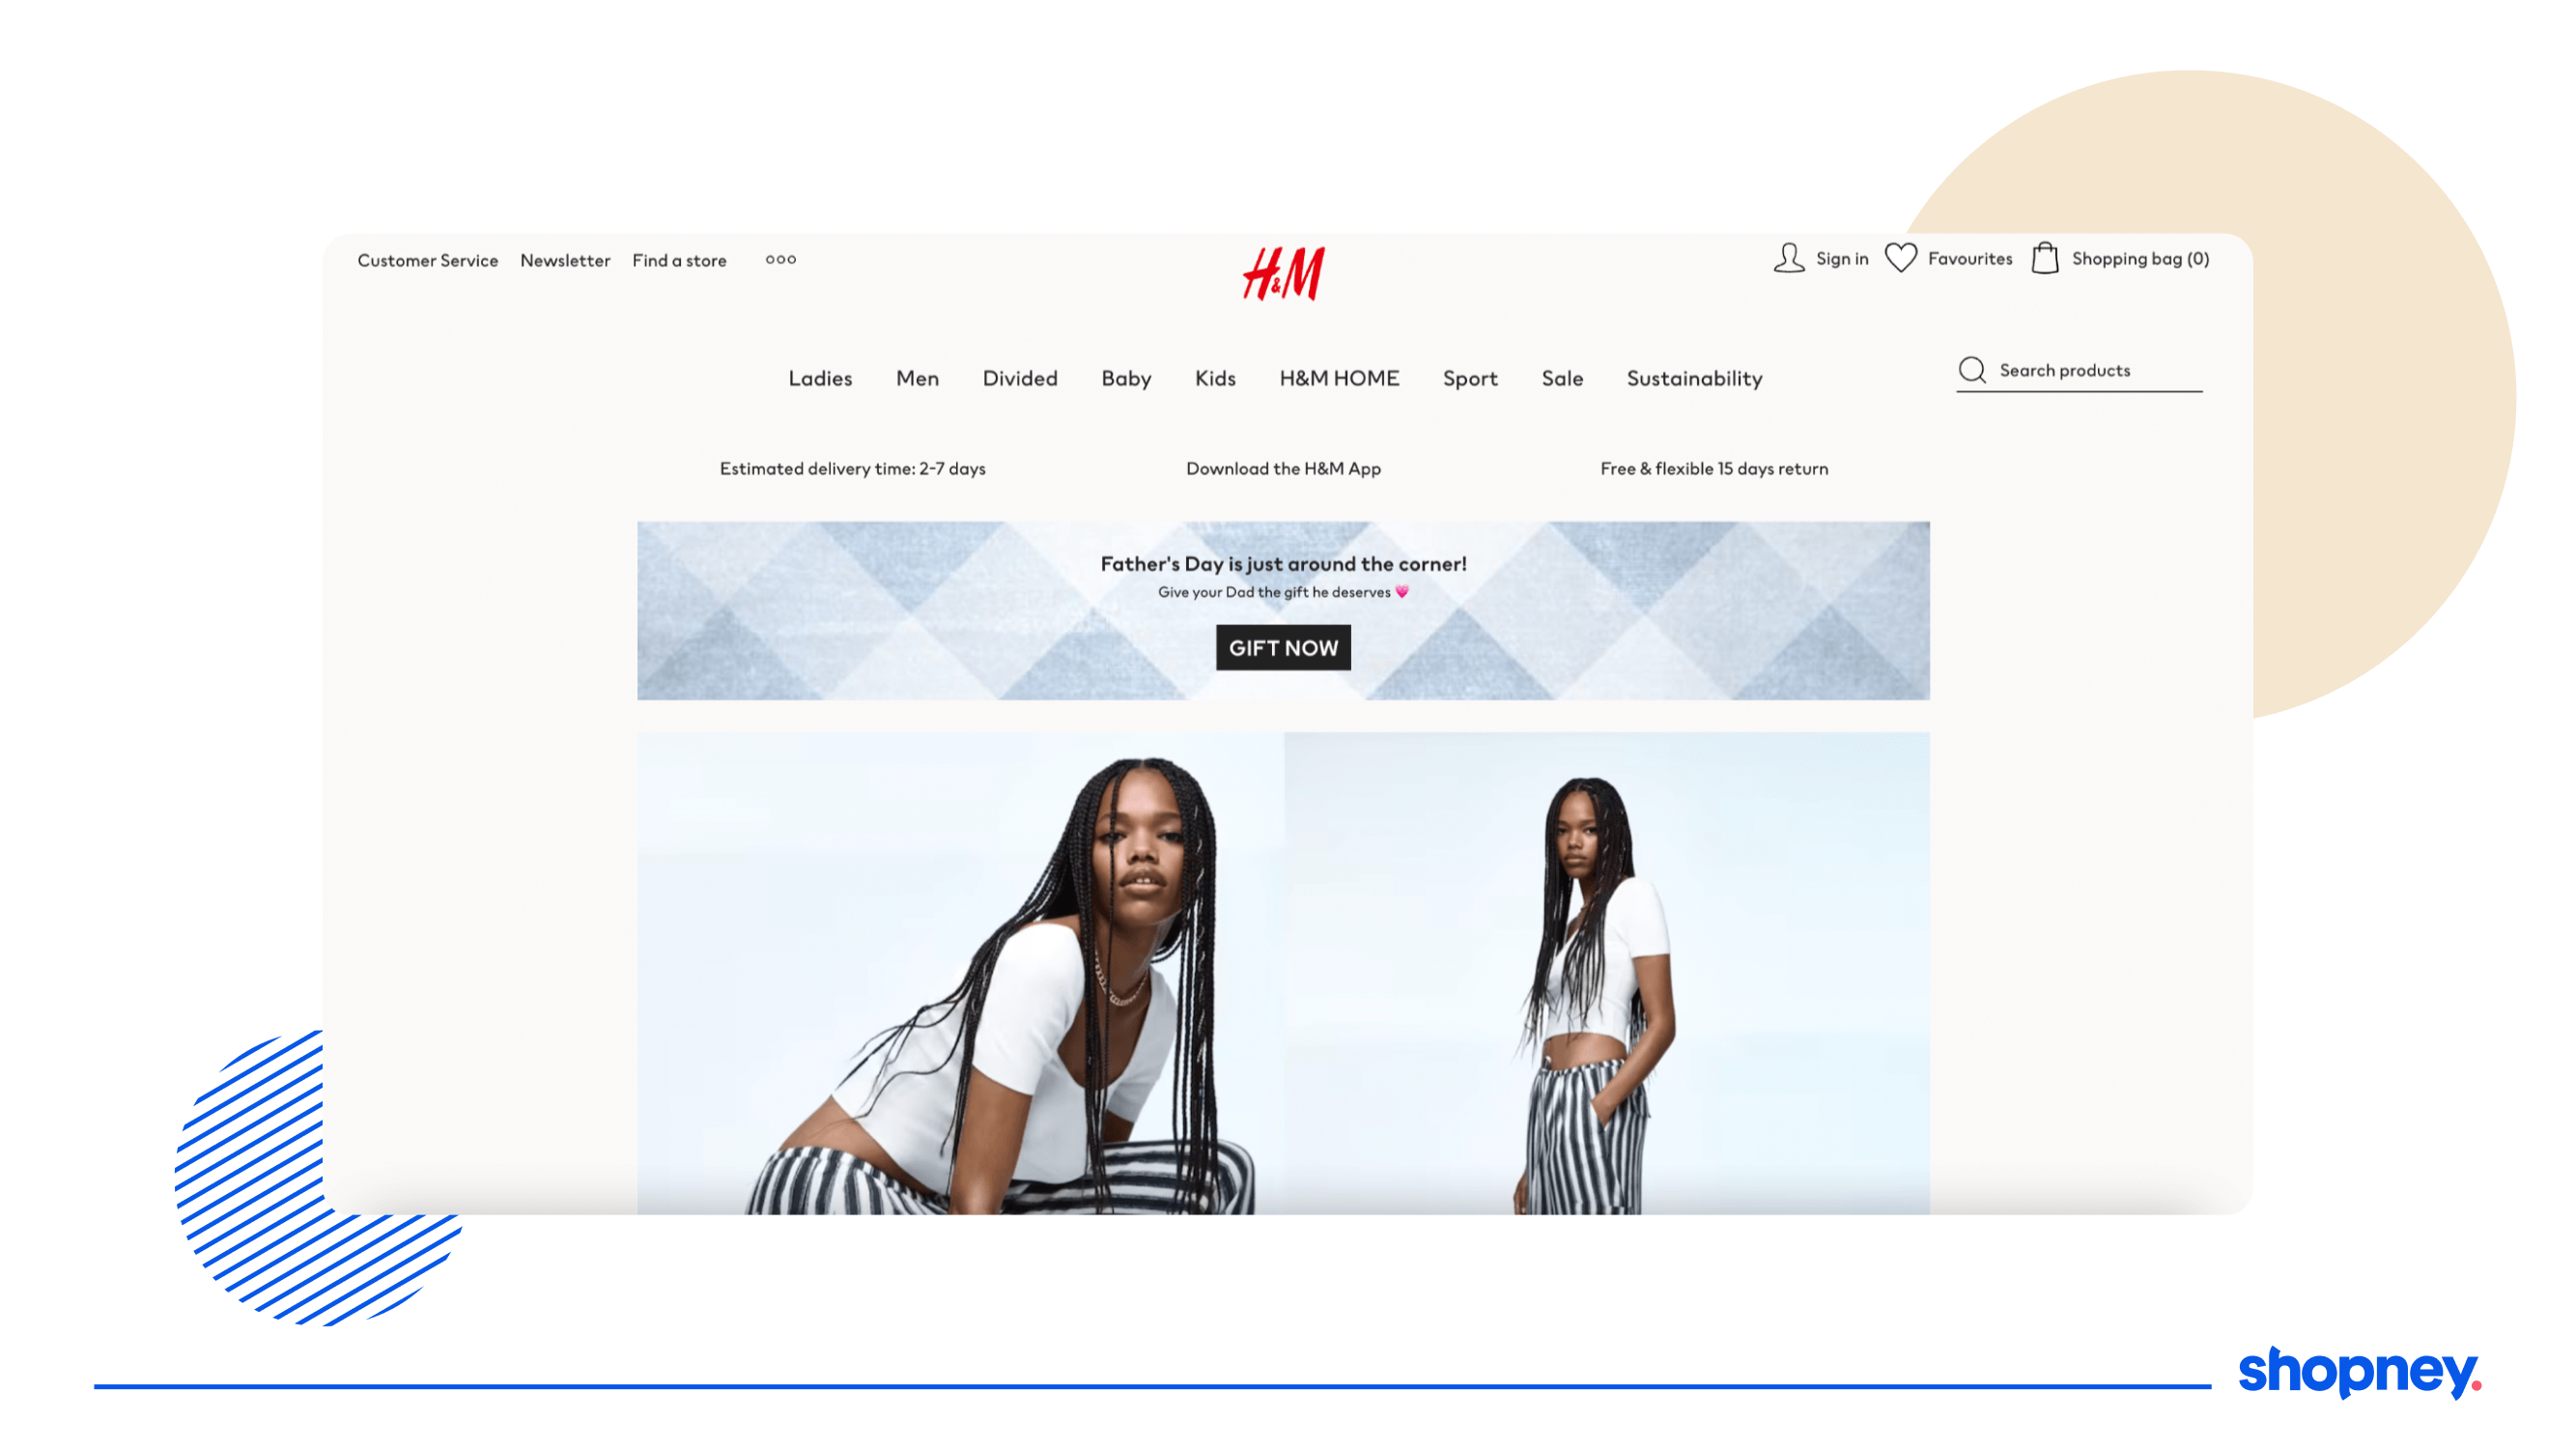 H&M CTA on website to install their mobile app